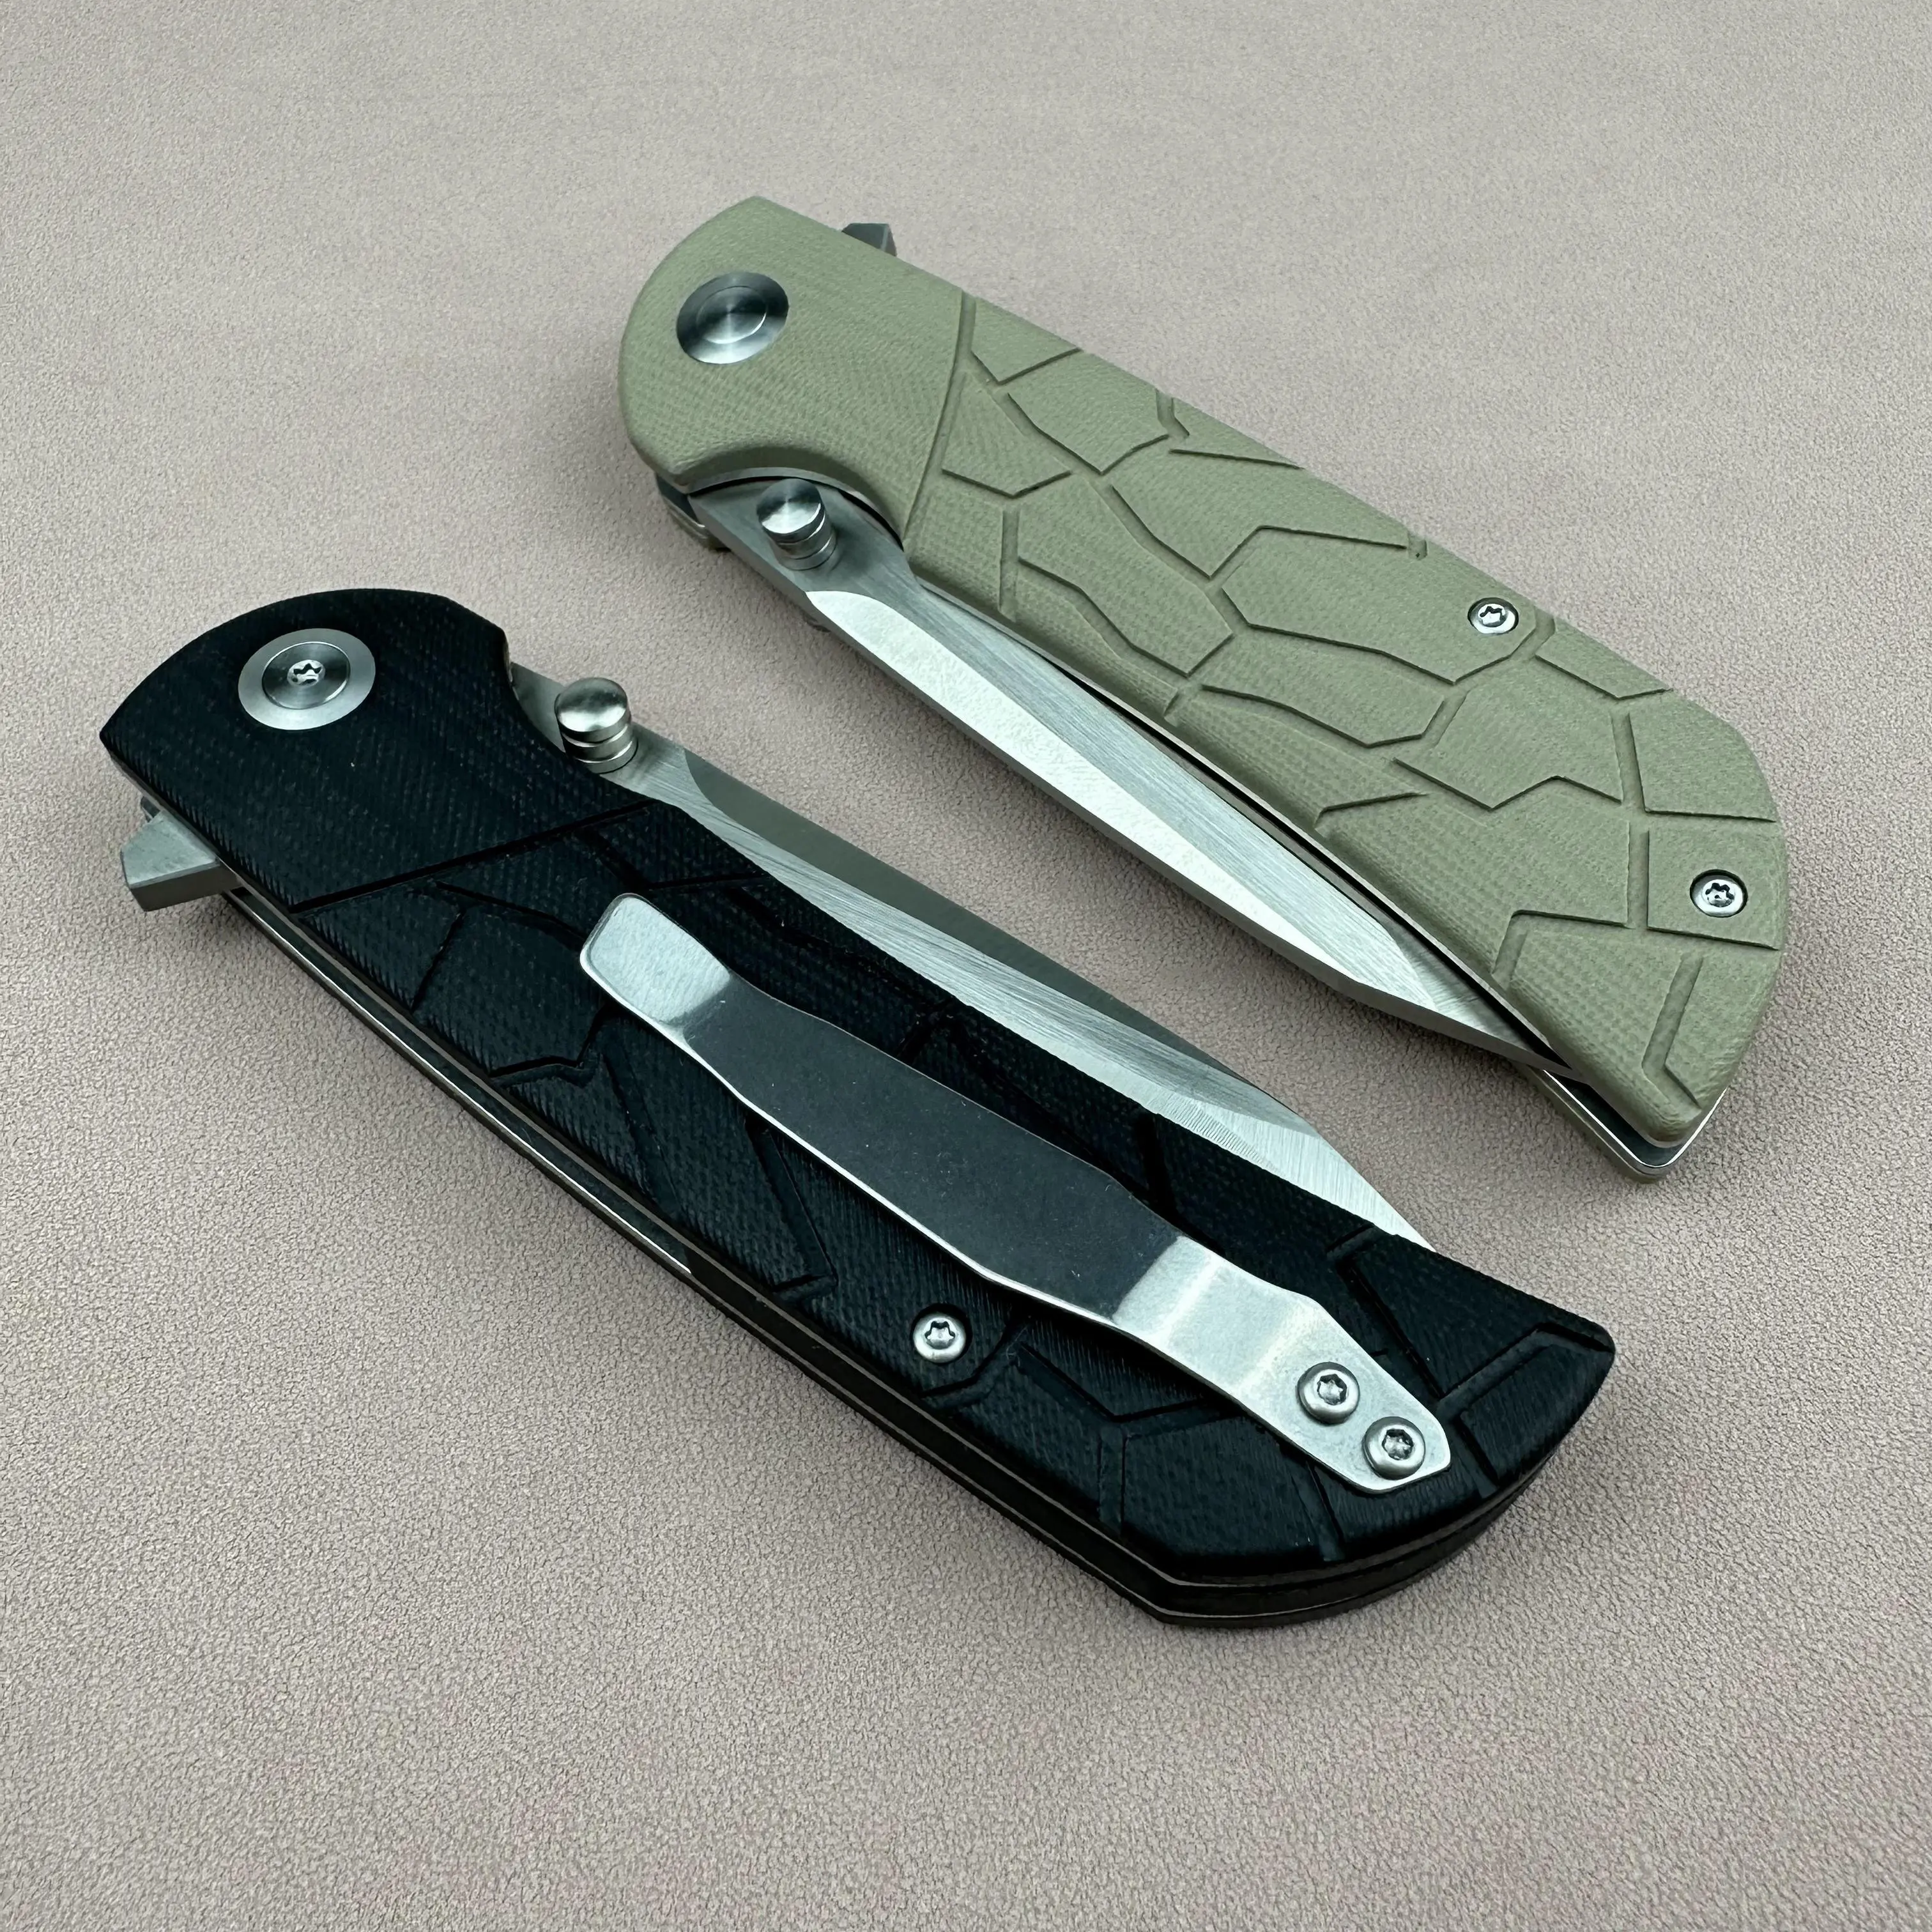 Self Defense Folding Knife with Premium Bearing Ball Quick Smooth Opening, 7C17MOV Steel Blade, G10 Handle, EDC Outdoor Tool